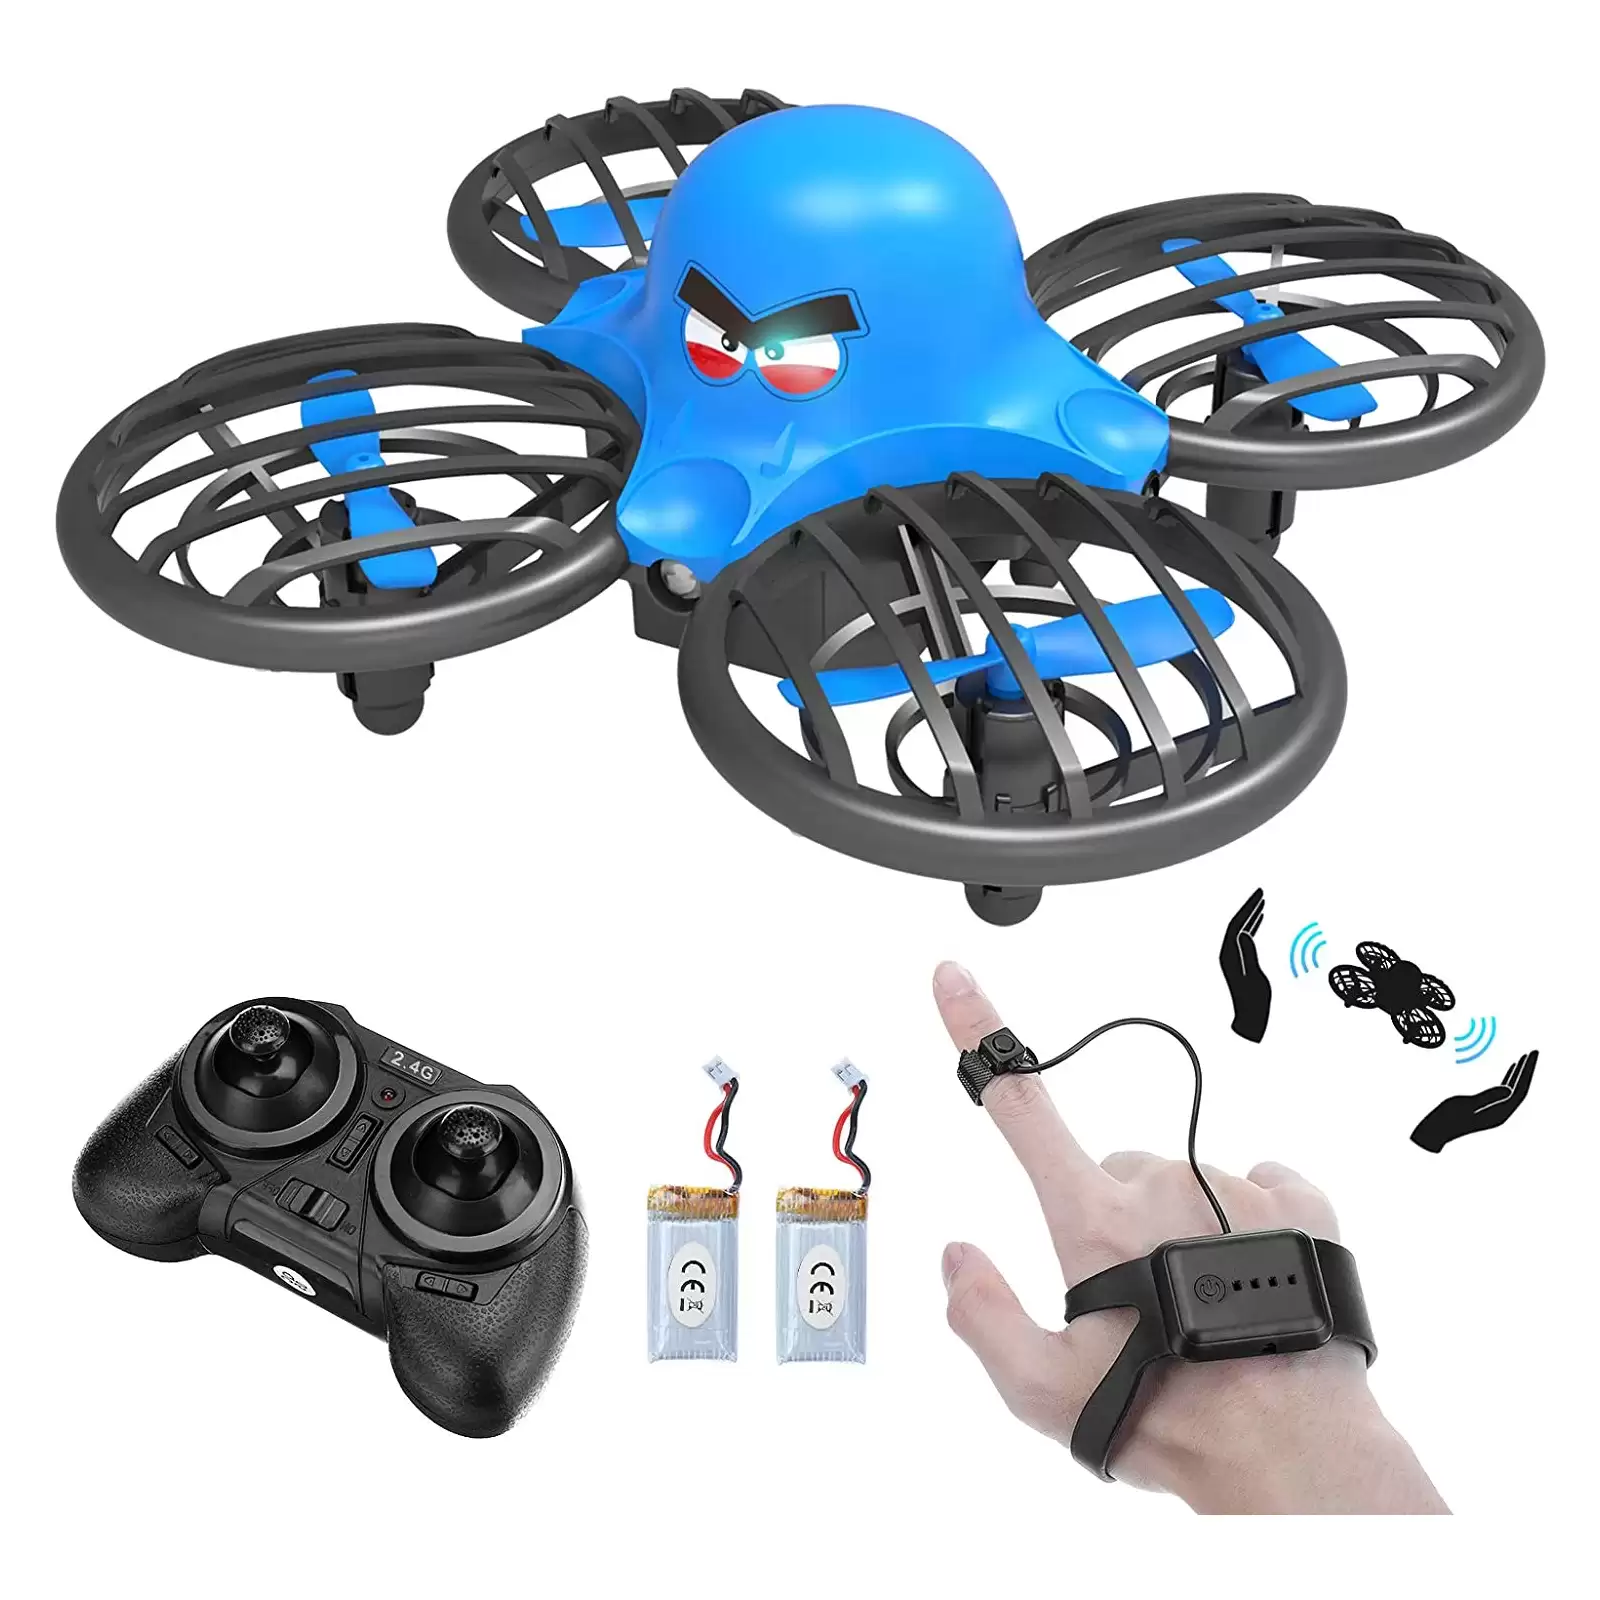 Order In Just $25.19 Flyhal F111 Mini Drone Gesture Sensing Control 360° Flip Led Light Altitude Hold Rc Quadcopter - Two Batteries With This Coupon At Banggood